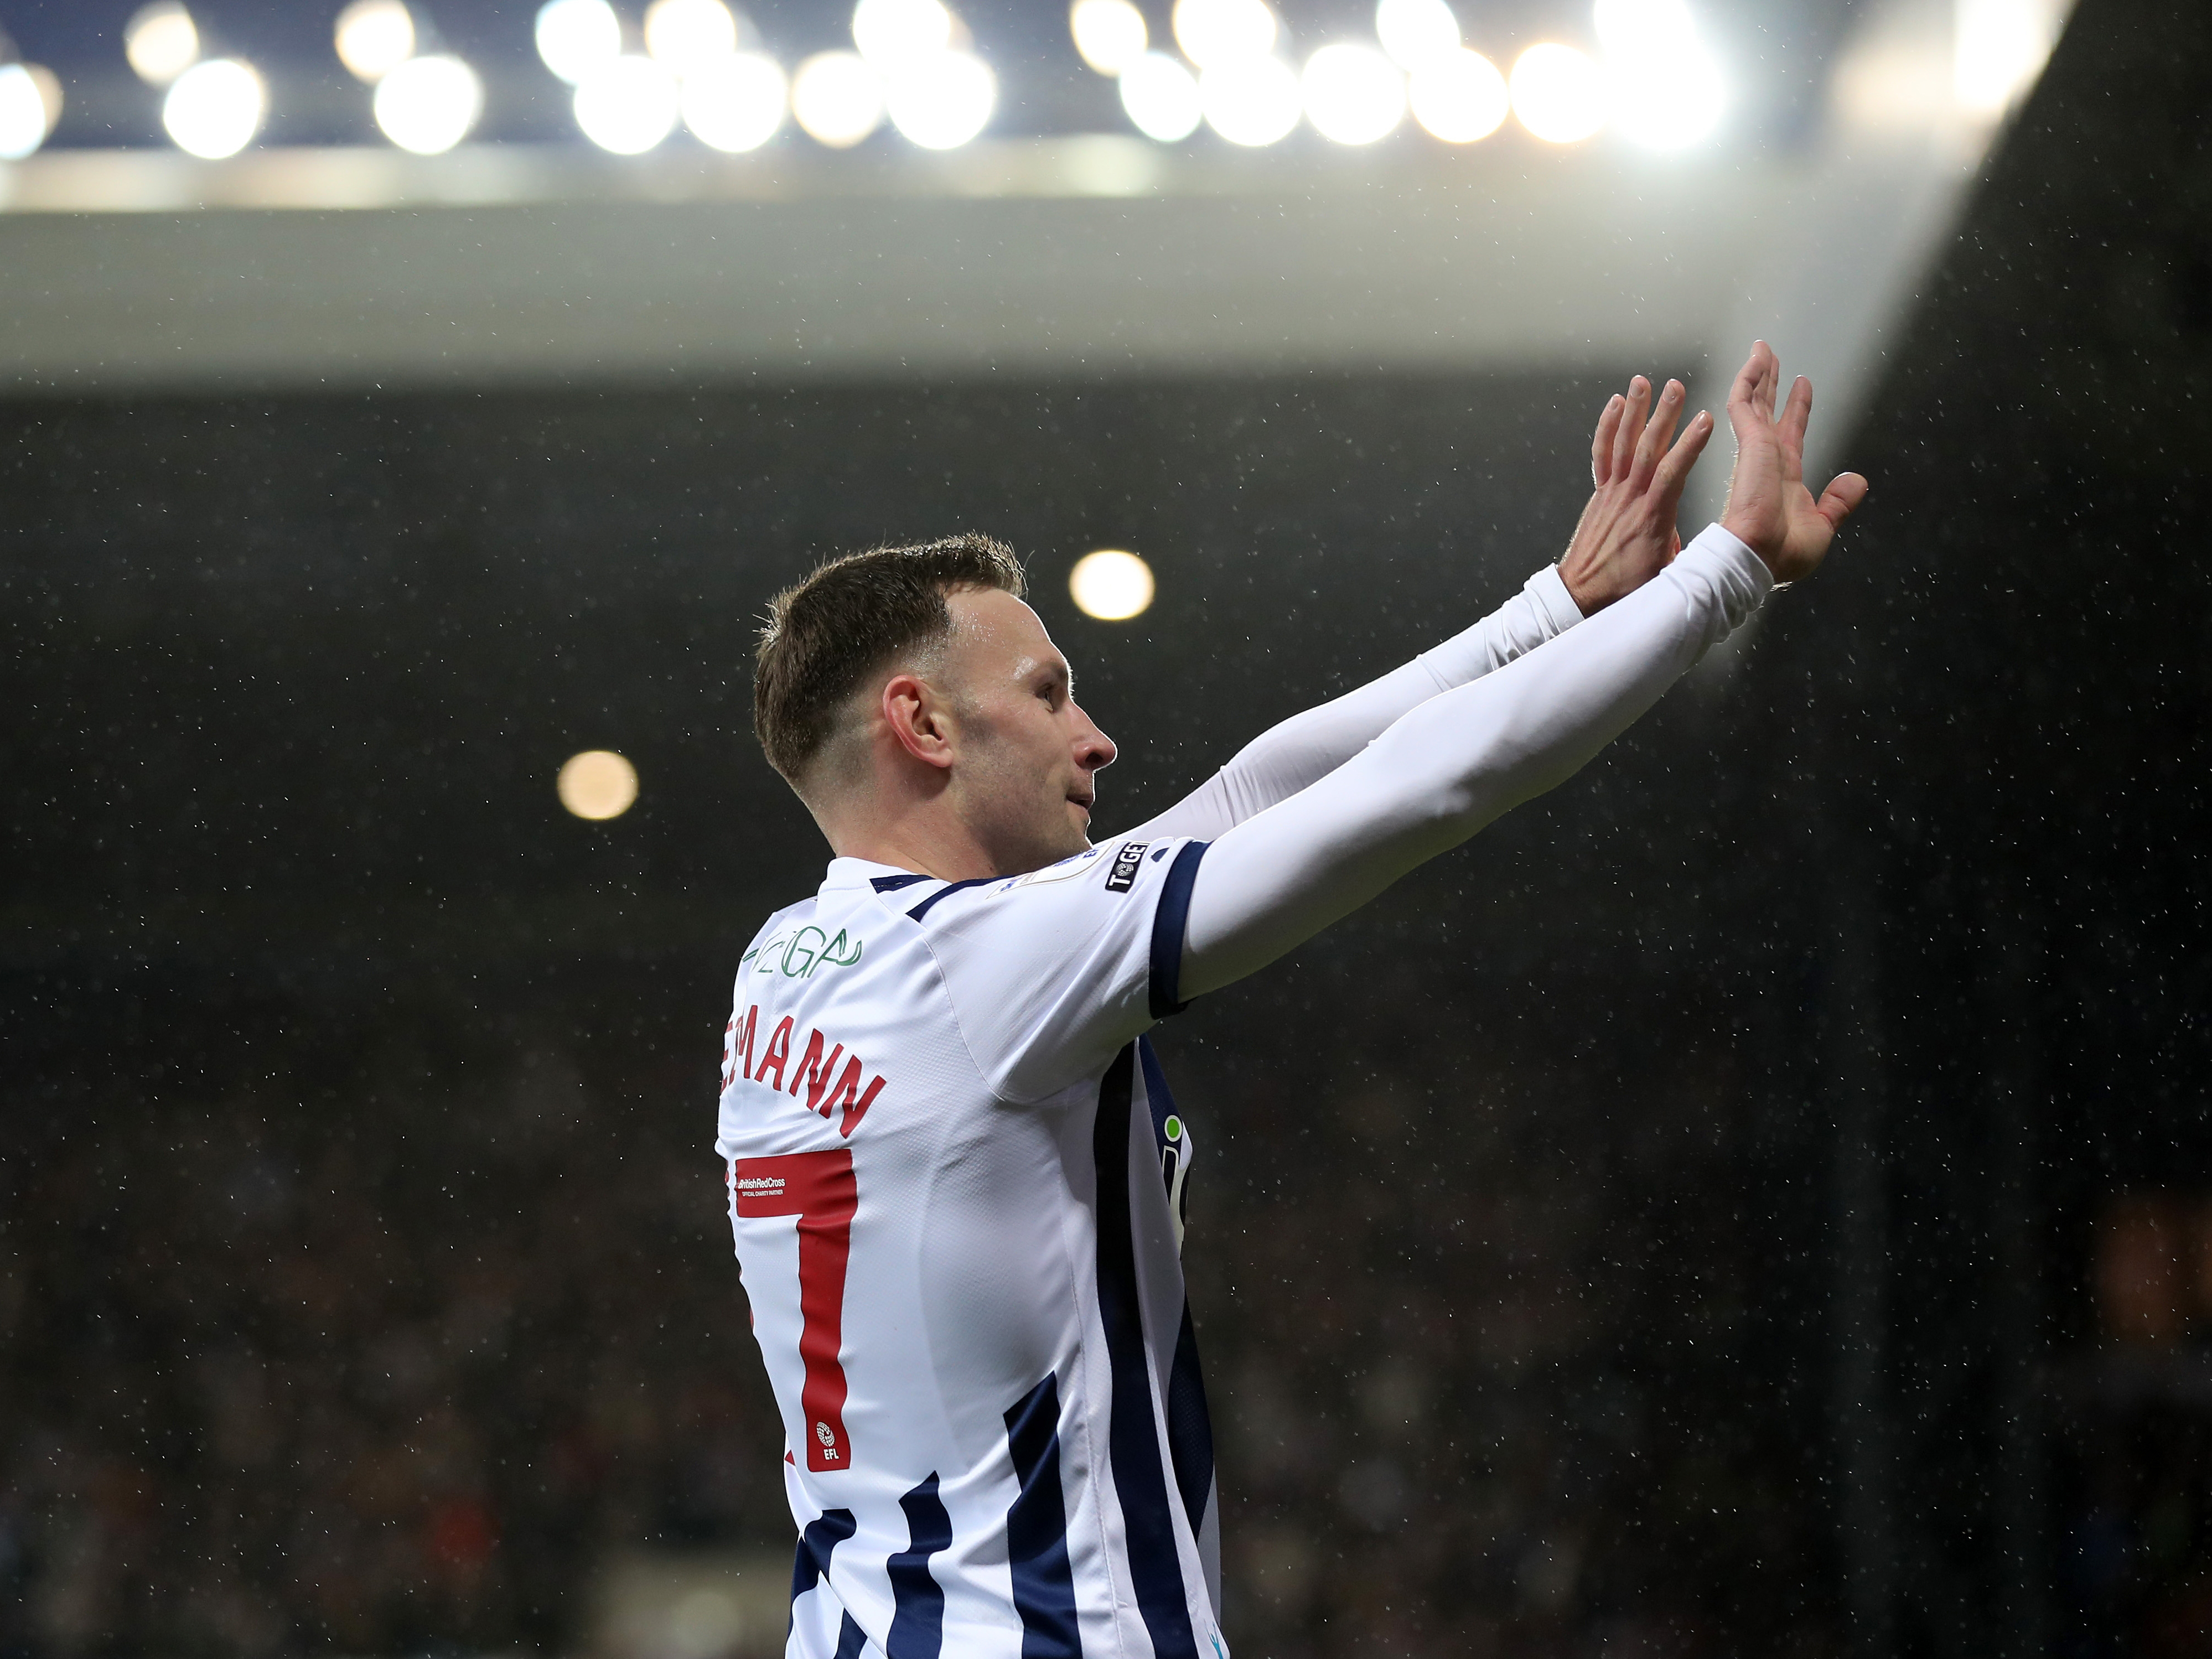 An image of Andi Weimann celebrating a goal against Birmingham